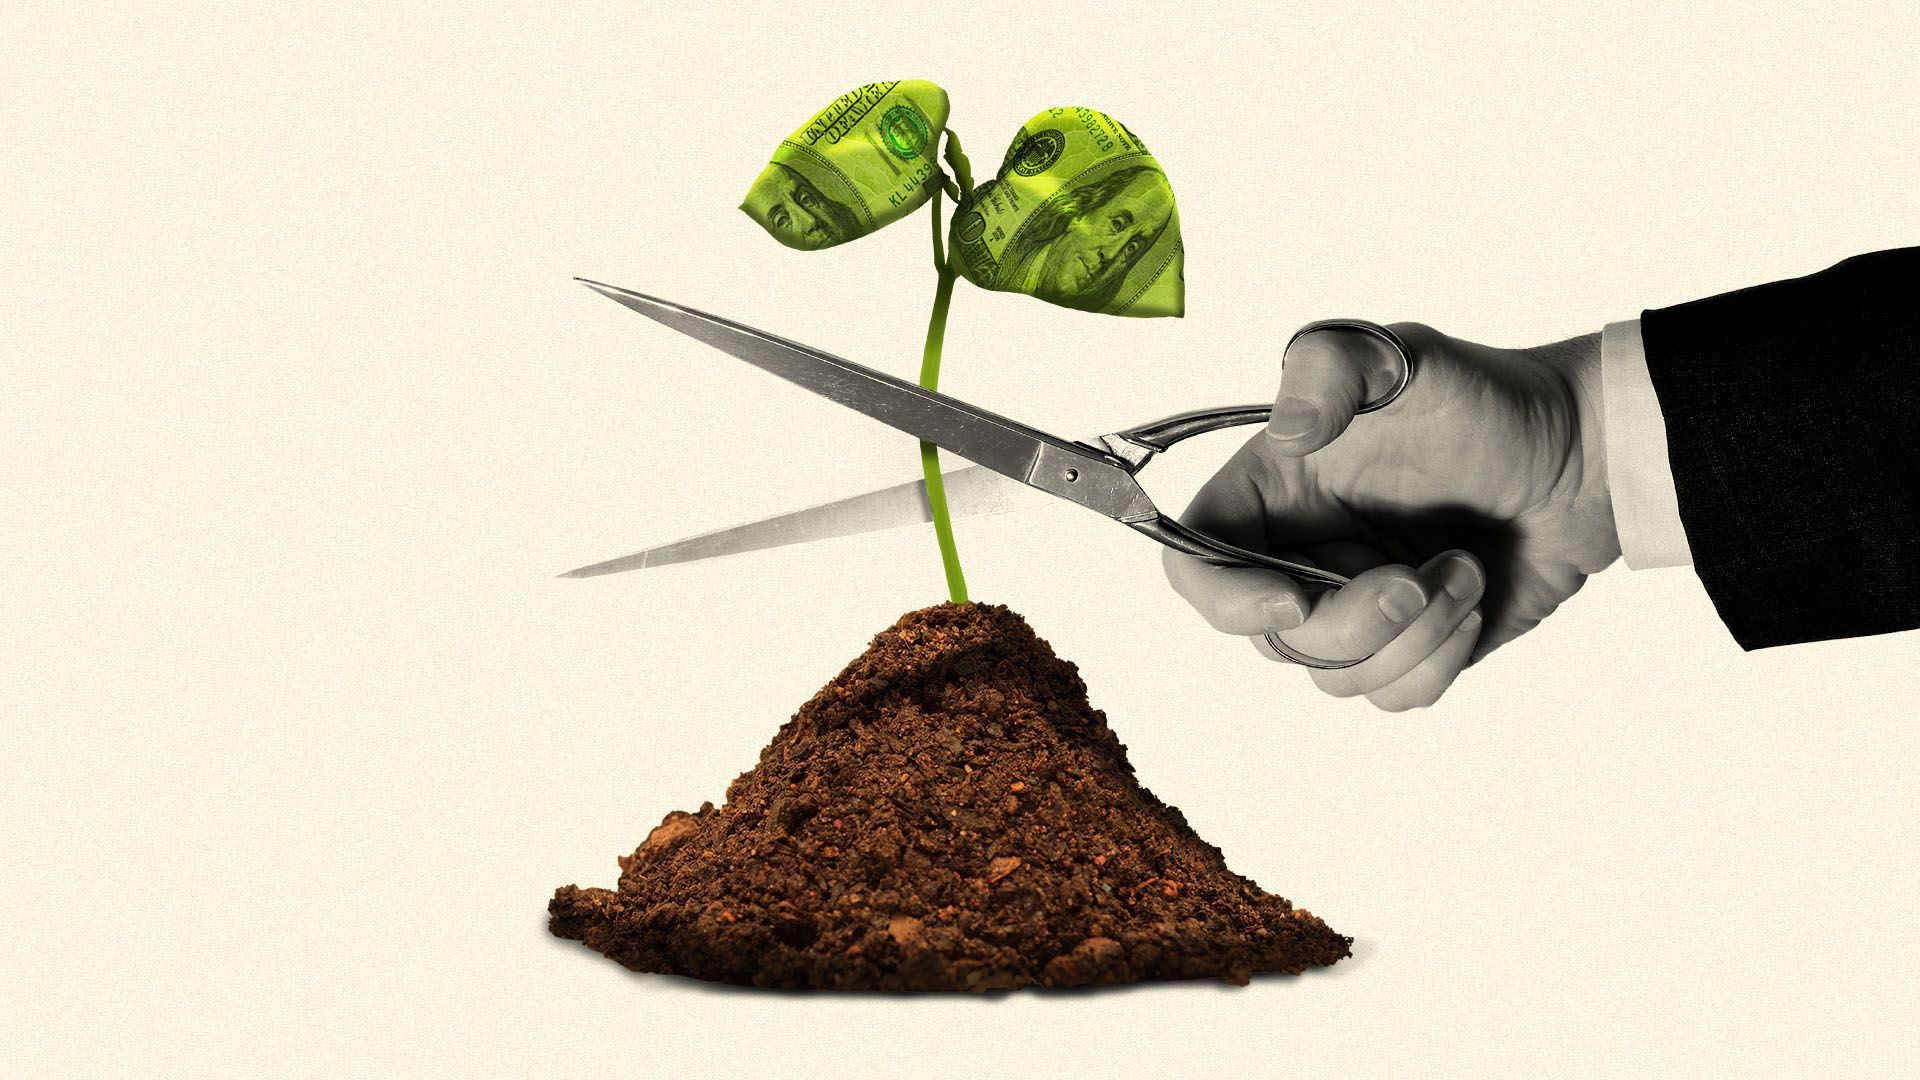 Illustration of a hand using scissors to cut a money plant in a mound of dirt